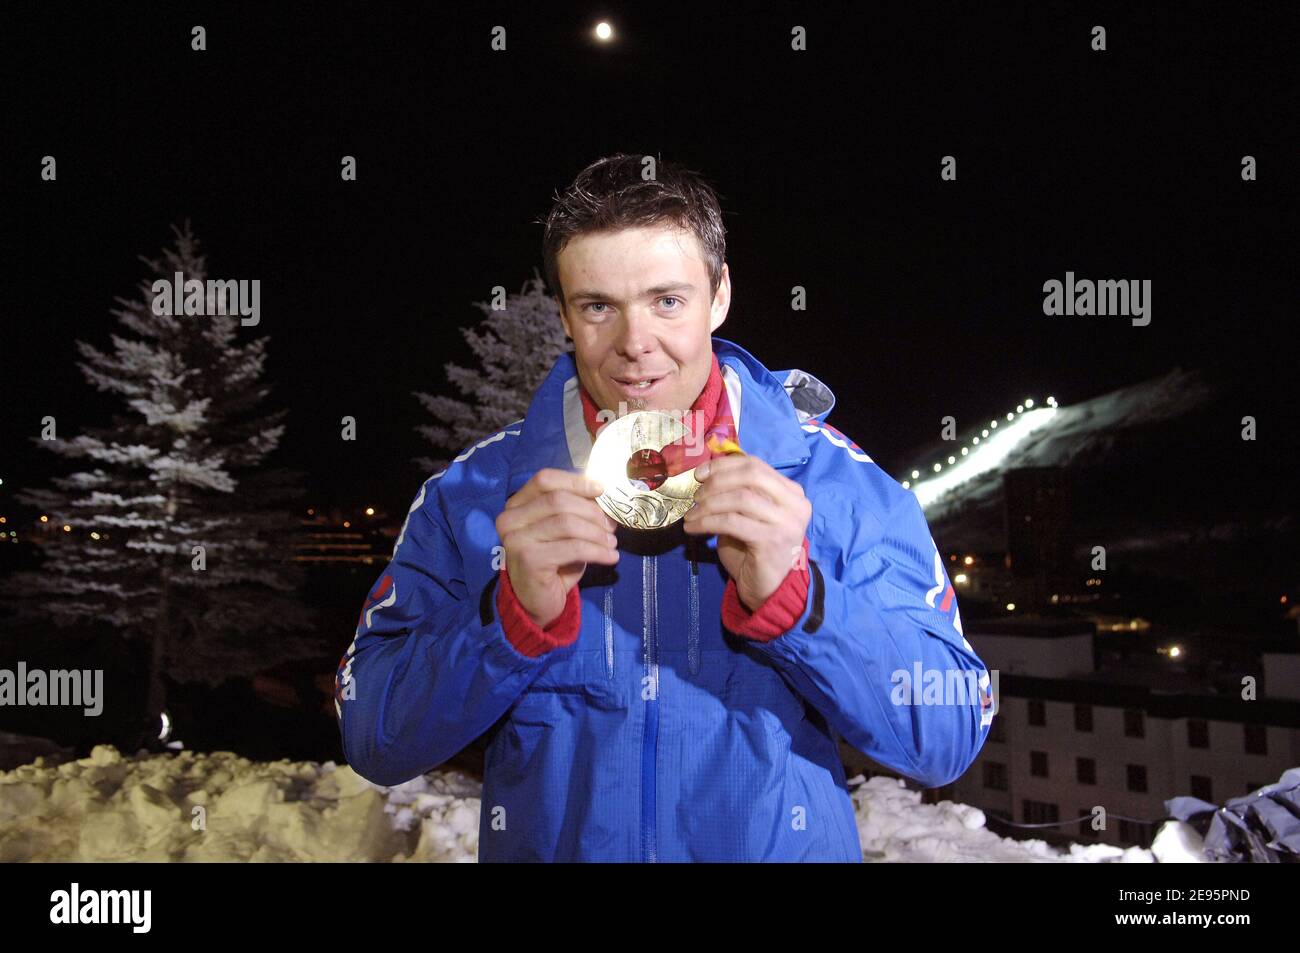 France's Antoine Deneriaz poses with his gold medal of the Men's downhill at the XX Olympic Winter Games in Sestrieres, Italy, on February 12, 2006. Photo by Gouhier-Nebinbger-Orban/CAMELEON/ABACAPRESS.COM Stock Photo